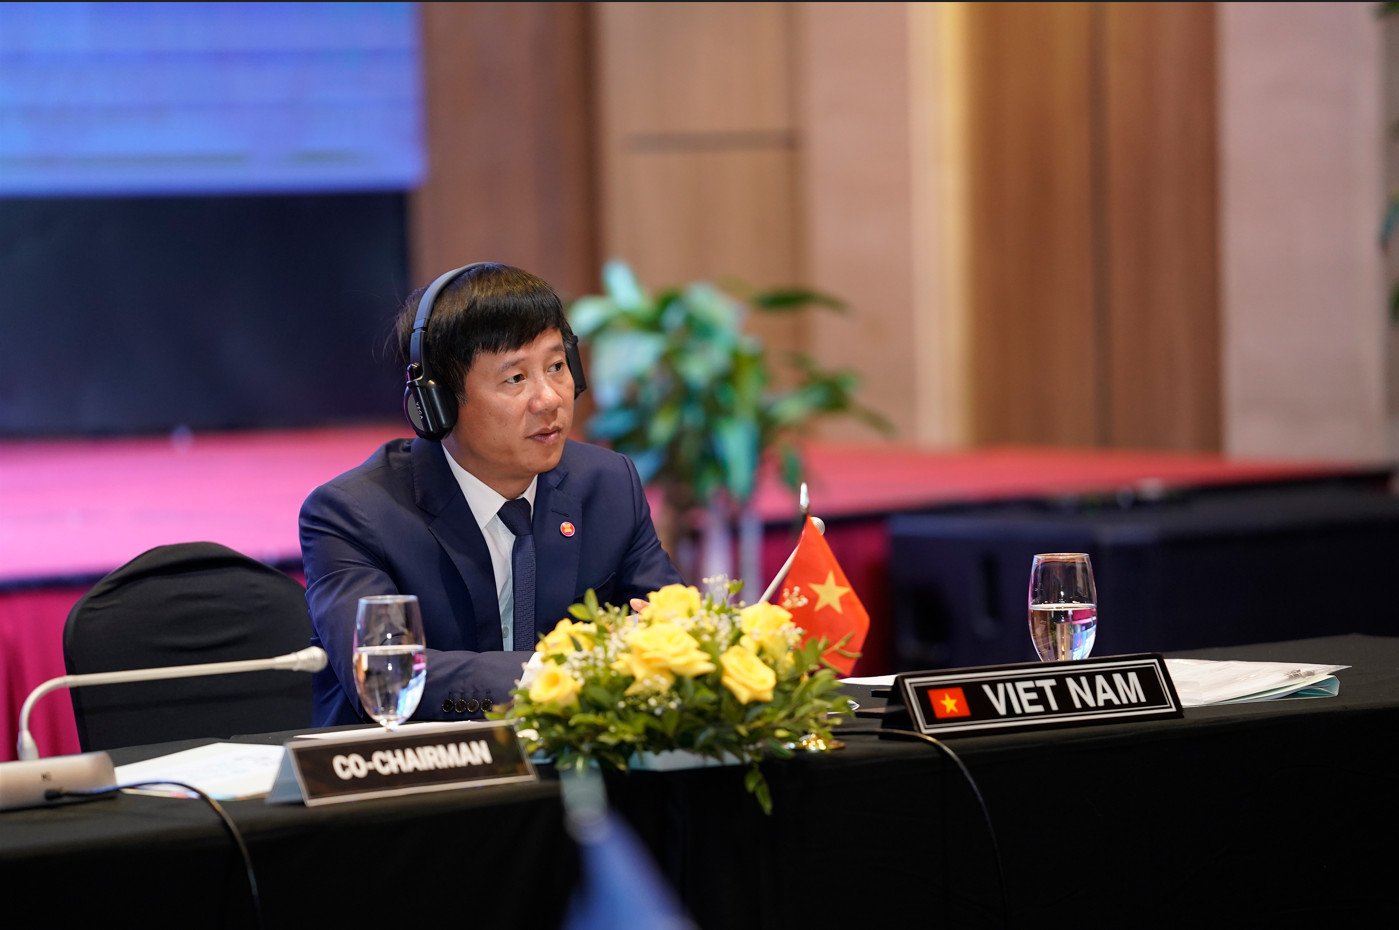 Mr. Pham Duc Luan – Director of the Department of Dike Management and Disaster Prevention and Chief of the Office of the National Steering Committee for Natural Disaster Prevention and Control – co-chairs the meeting of the 5th annual ASEAN Committee on Disaster Management (ACDM) + China on June 15 in Da Nang. Photo: NH.